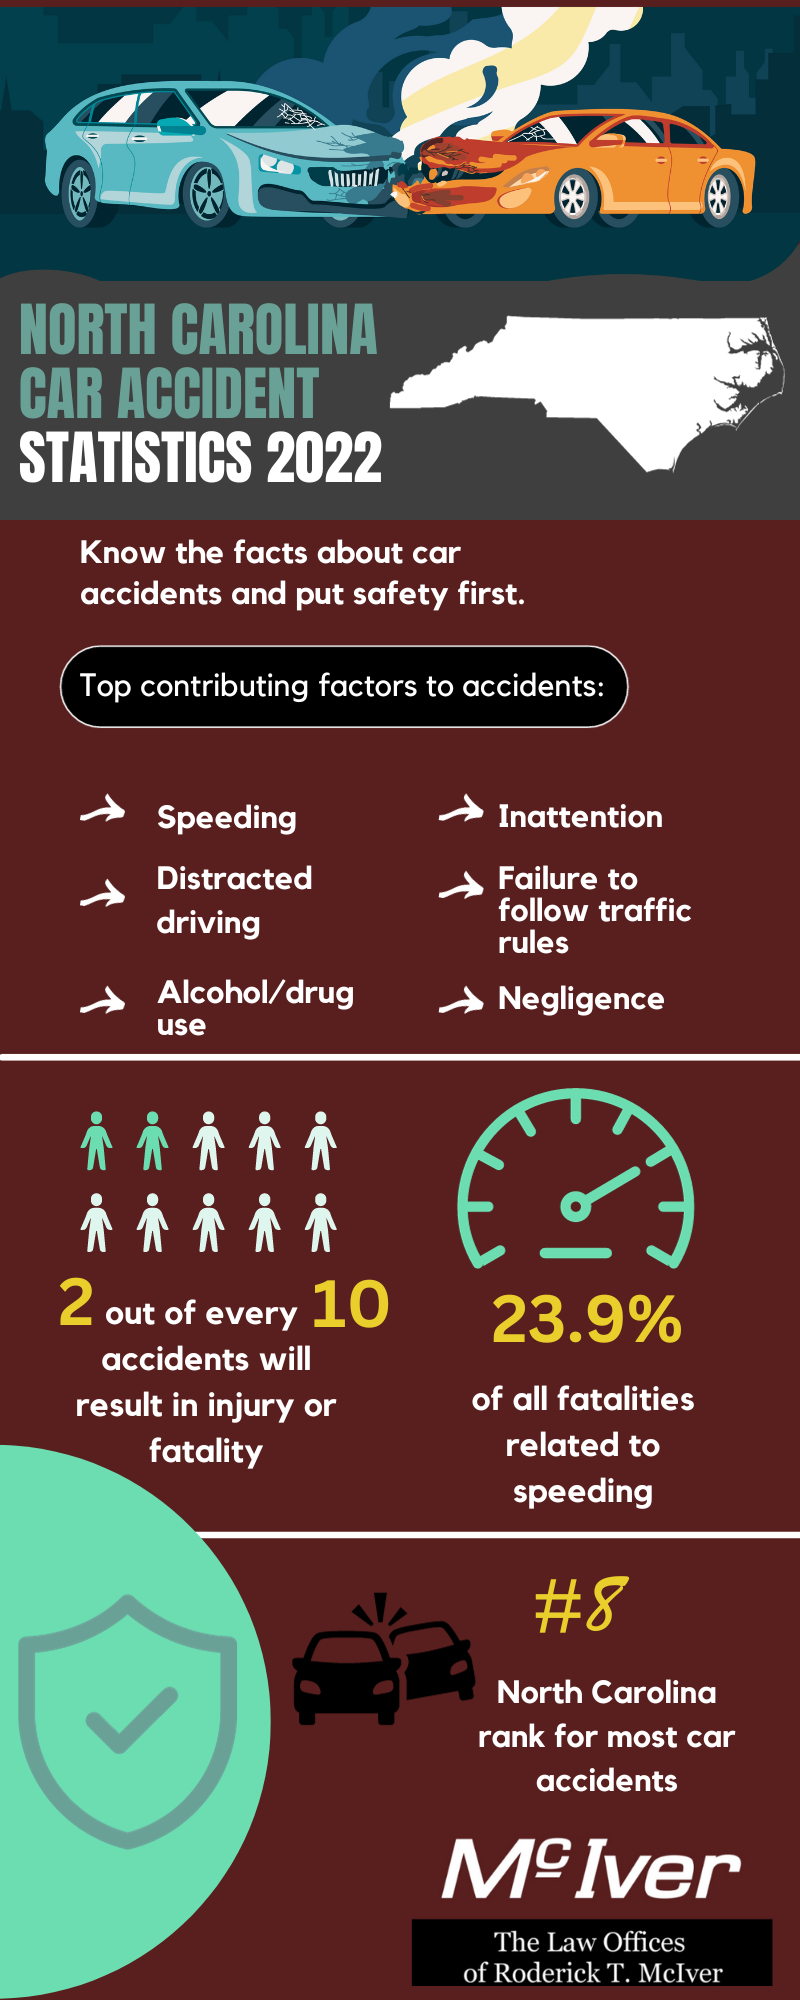 Image is of an infographic 'North Carolina Car Accident Statistics 2022". Know the facts about car accidents and put safety first. Top Contributing Factors to Car Accidents: speeding, distracted driving, alcohol/drug use, inattention, failure to follow traffic rules, negligence. Two out of every ten vehicle accidents will result in injury or fatality. 23.9% of all car accident related fatalities are related to speeding. North Carolina ranks #8 in the country for most vehicle accidents. Call McIver Law Firm